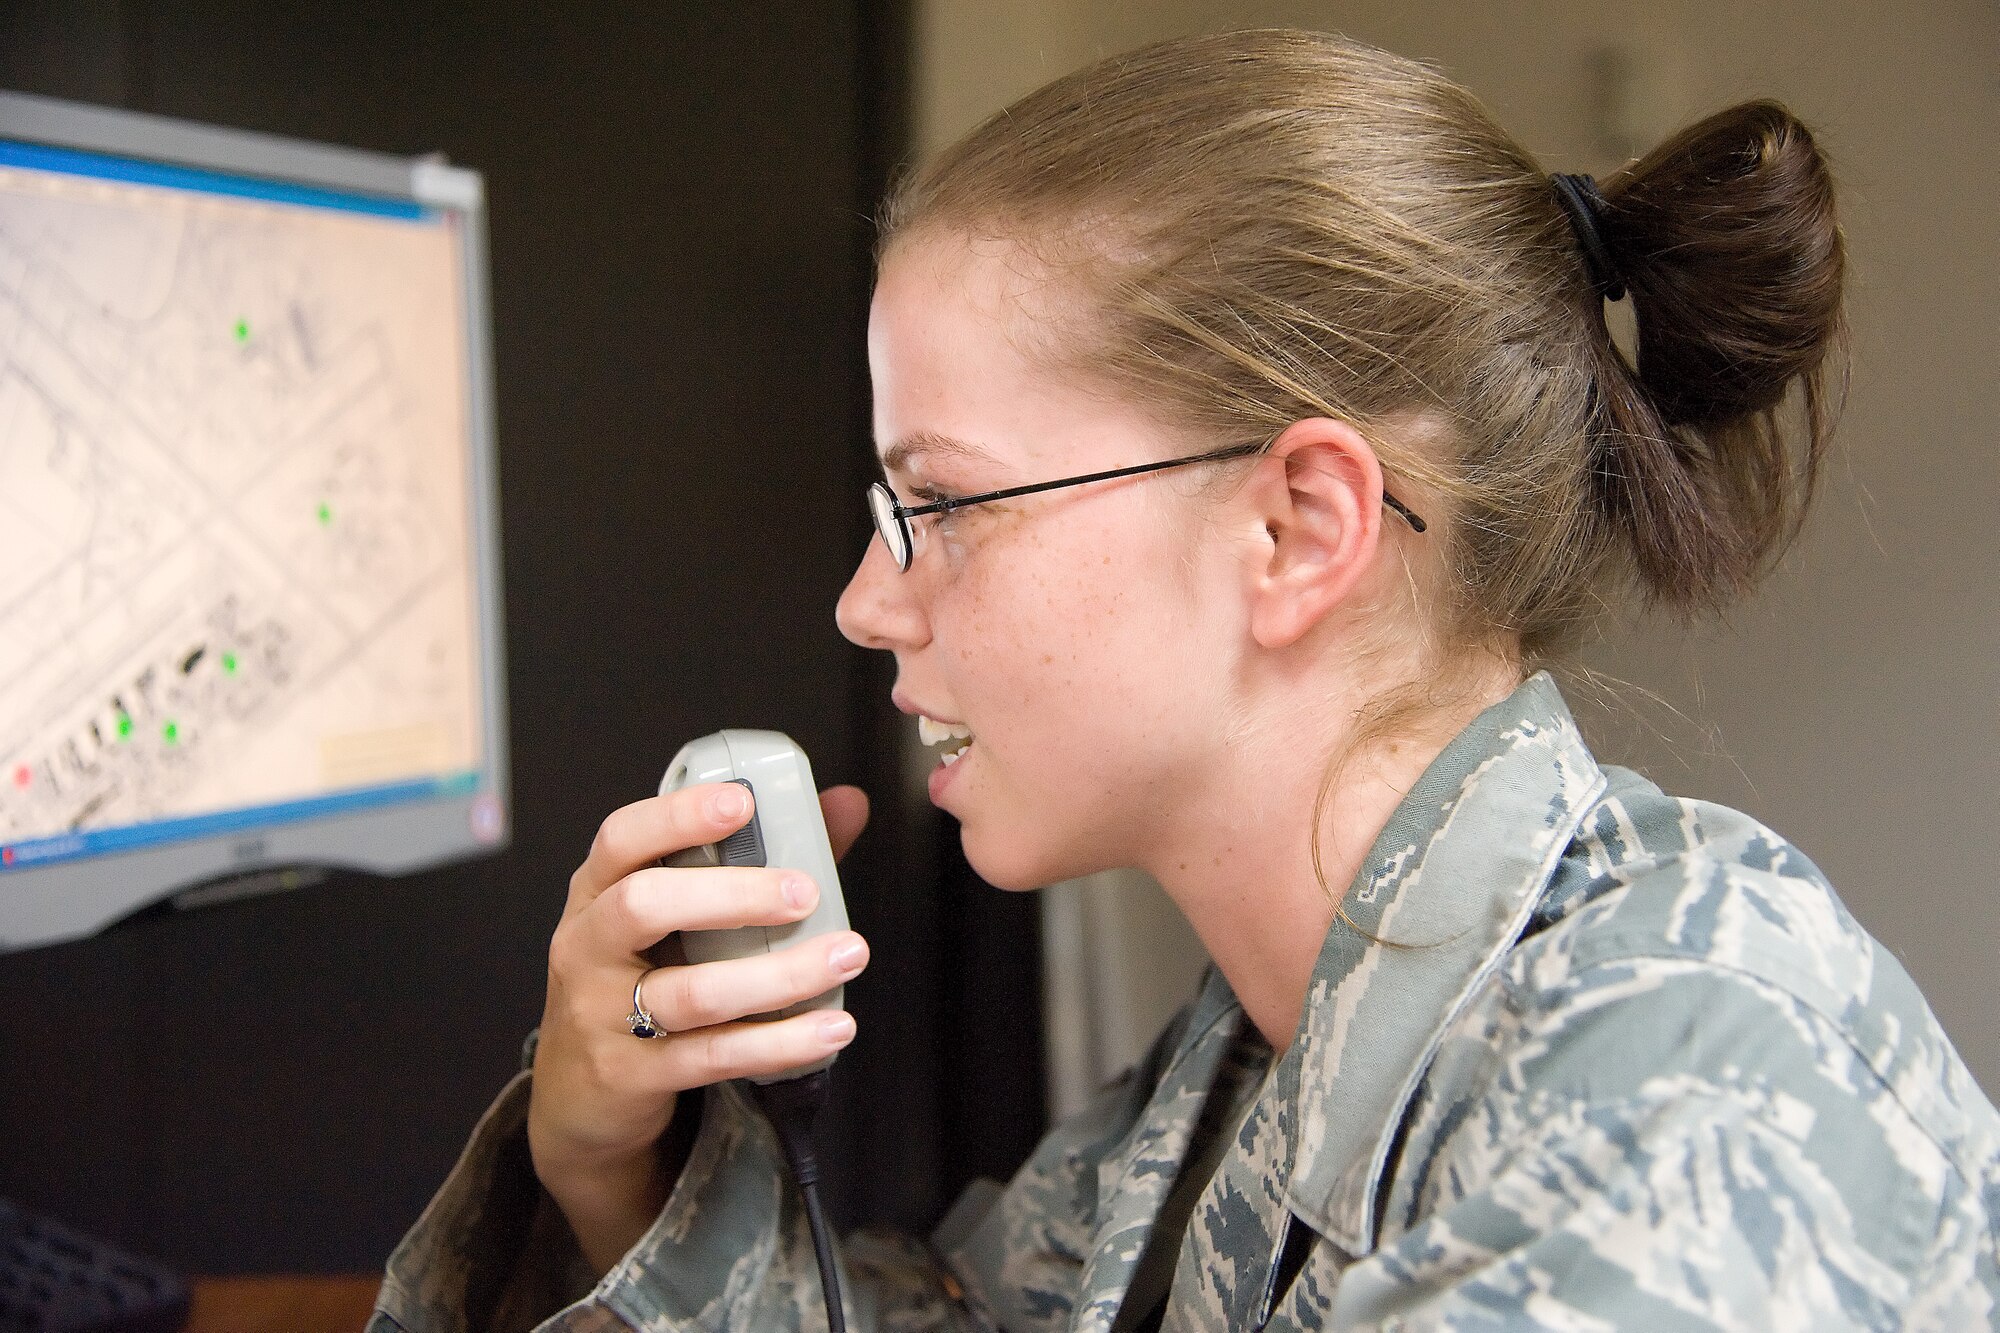 Senior Airman Meagan Orebaugh, a command and control specialist with the 436th Airlift Wing Command Post, makes a radio call July 27, 2011, at the command post at Dover Air Force Base, Del. Command and control specialist are responsible for receiving information, monitoring flightline operations, mission management and notifying participating parties of ongoing operations or alerts. (U.S. Air Force photo by Adrian Rowan)